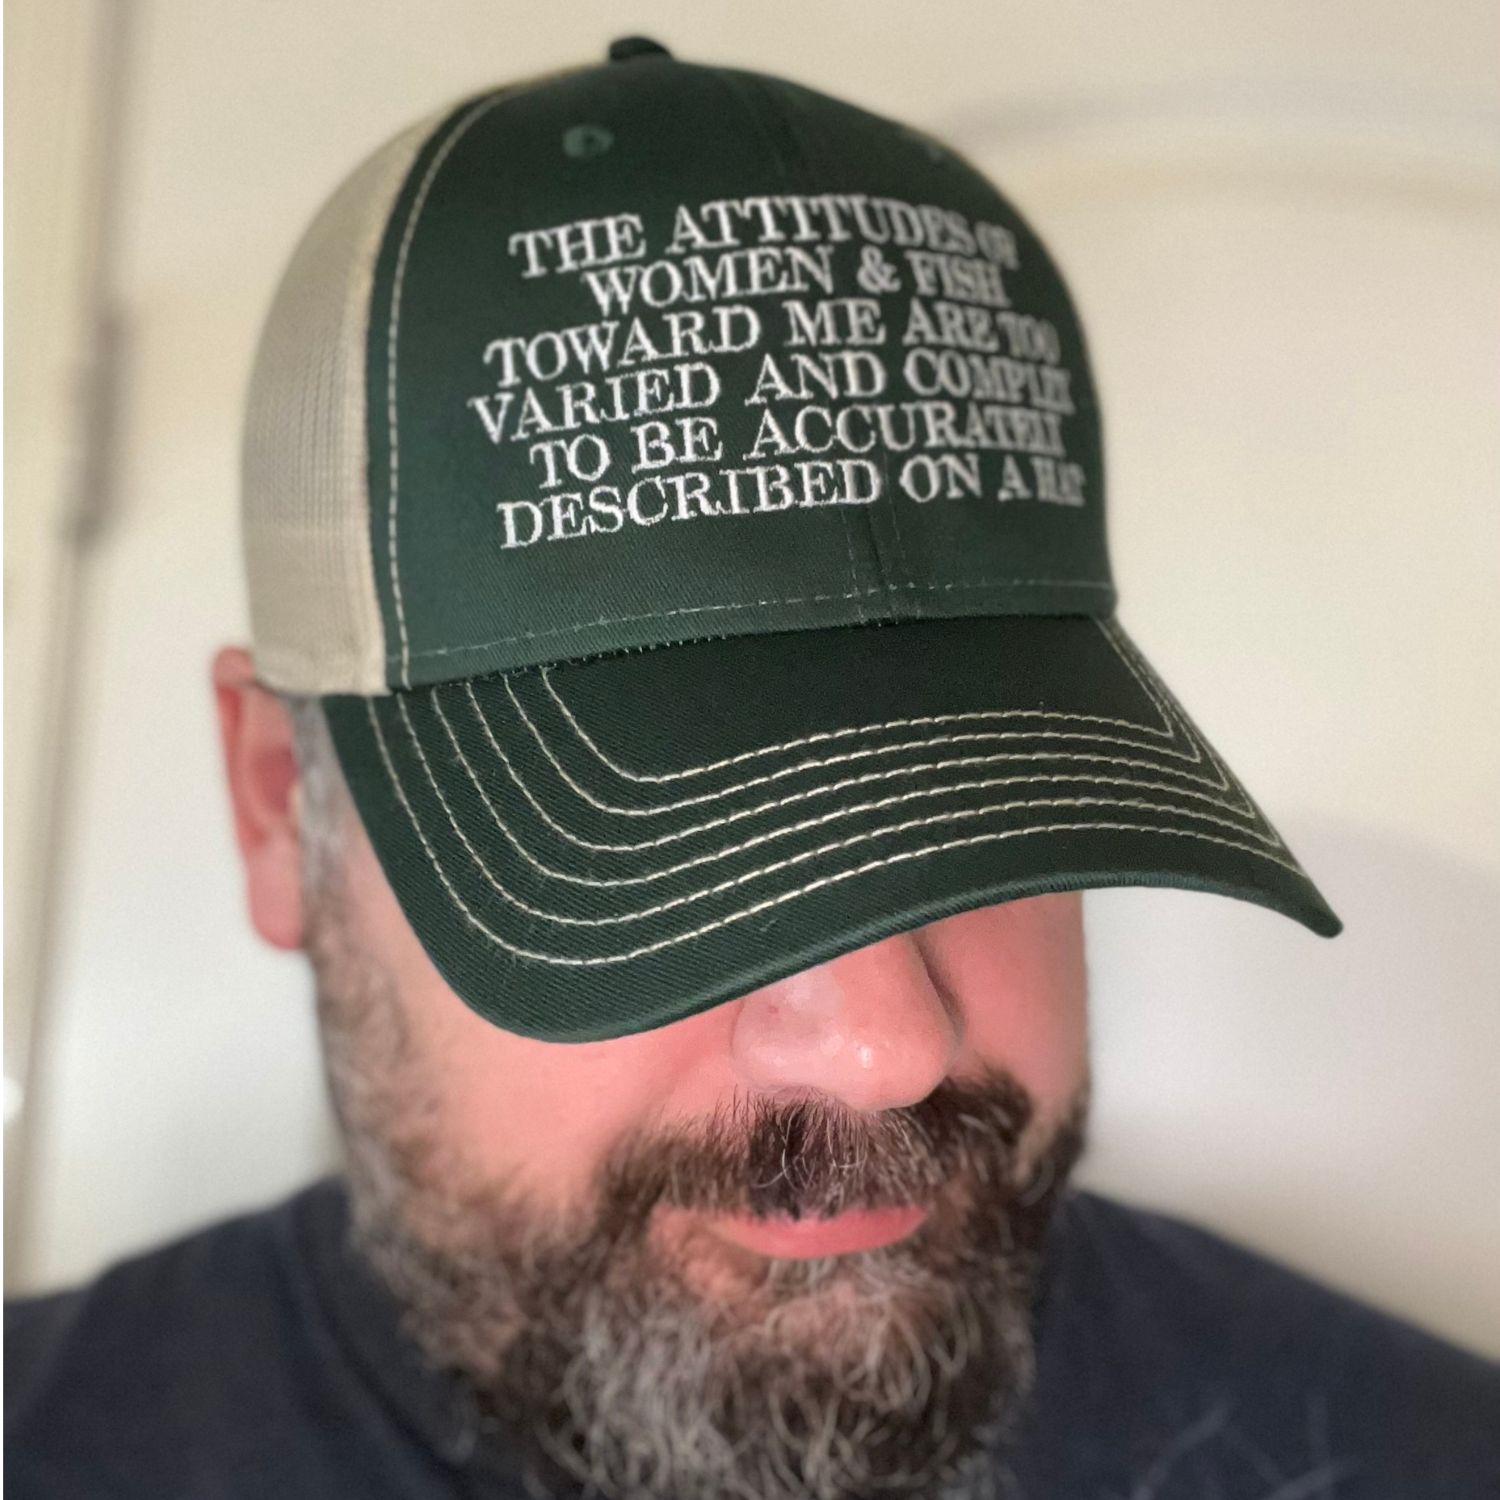 The attitudes of women and fish towards me are too varied and complex to be  accurately described on a hat Cap – AysheShop